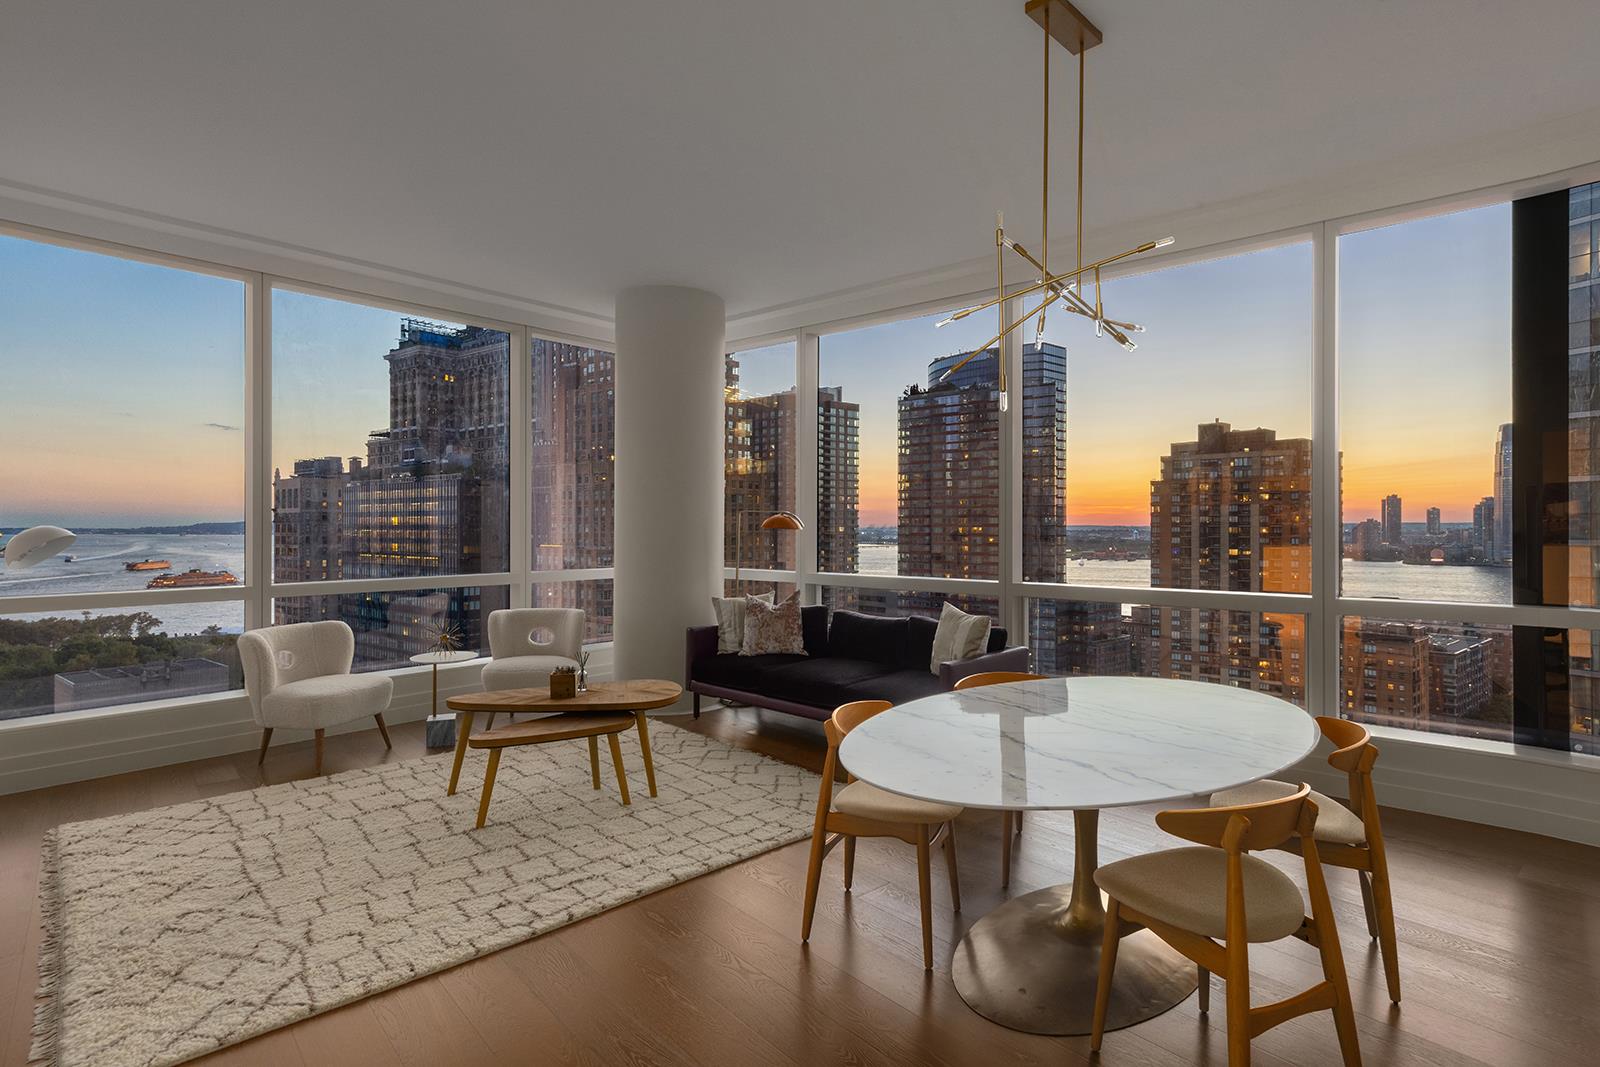 77 Greenwich Street 36-A, Financial District, Downtown, NYC - 4 Bedrooms  
3.5 Bathrooms  
7 Rooms - 